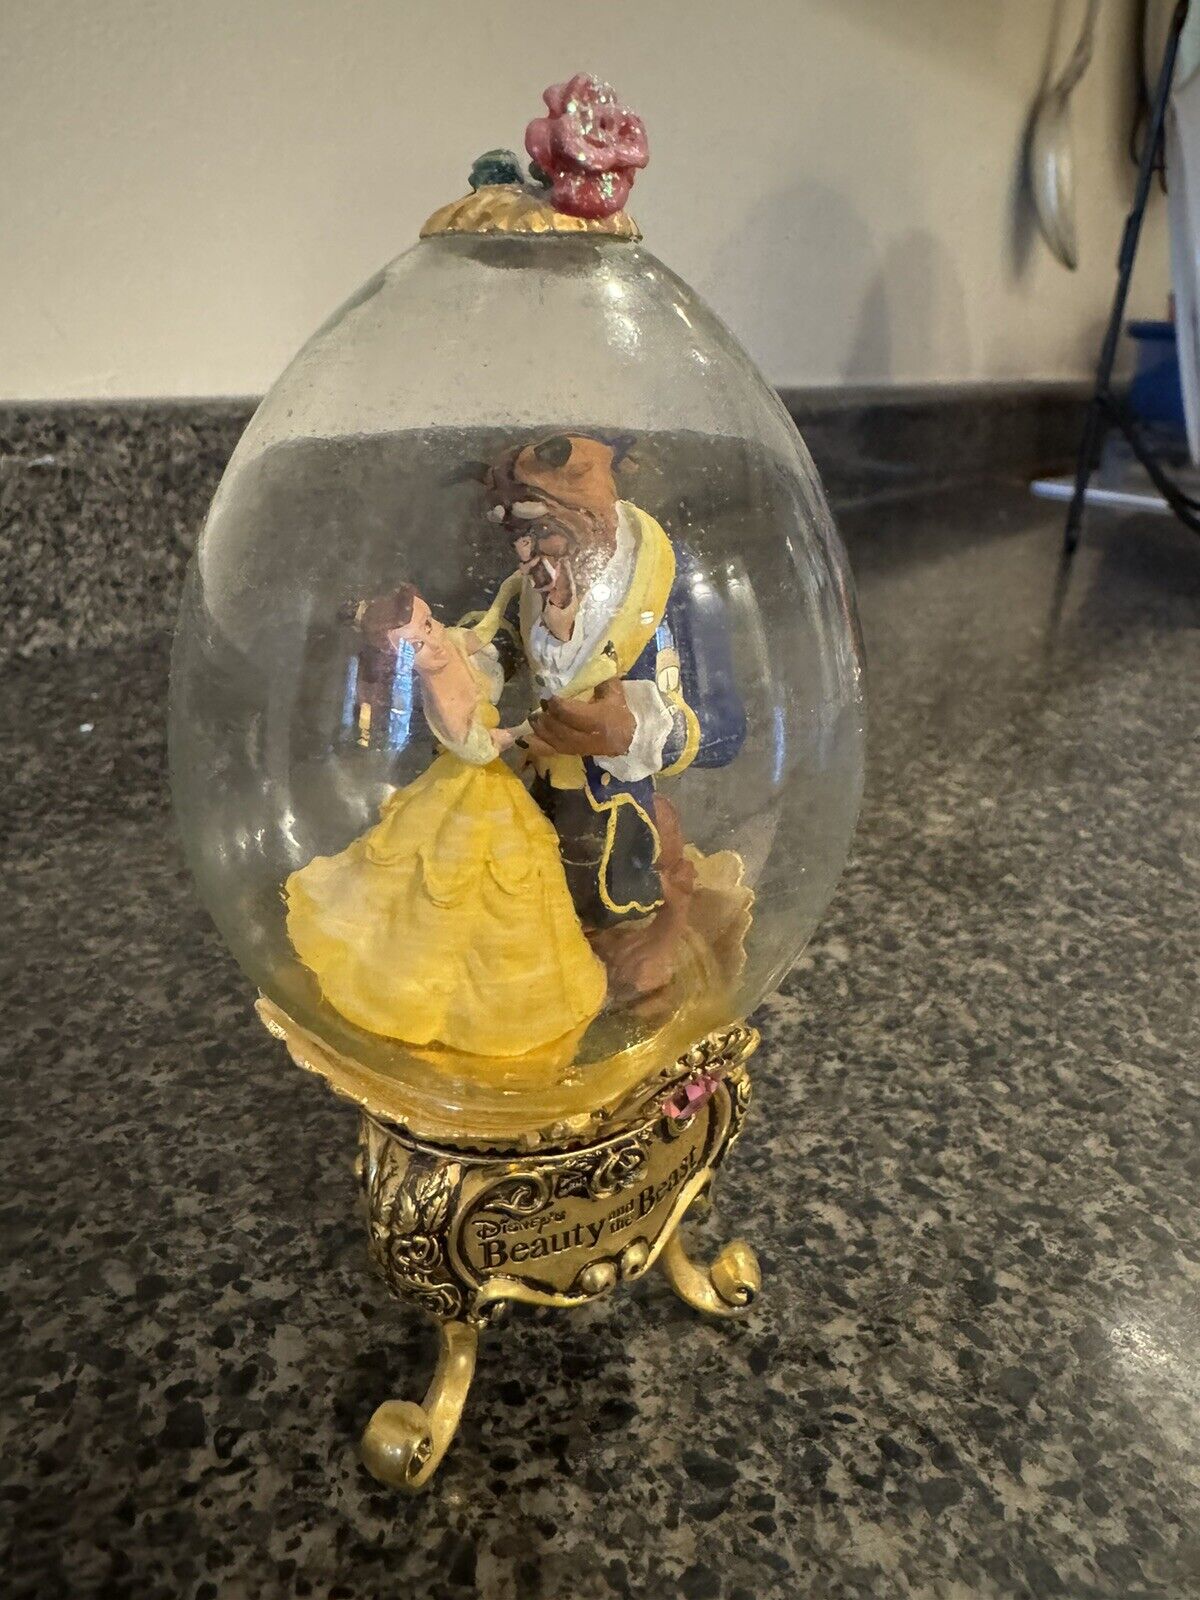 Vintage Franklin Mint 1990’s Disney Beauty and the Beast Footed Glass Dome Egg